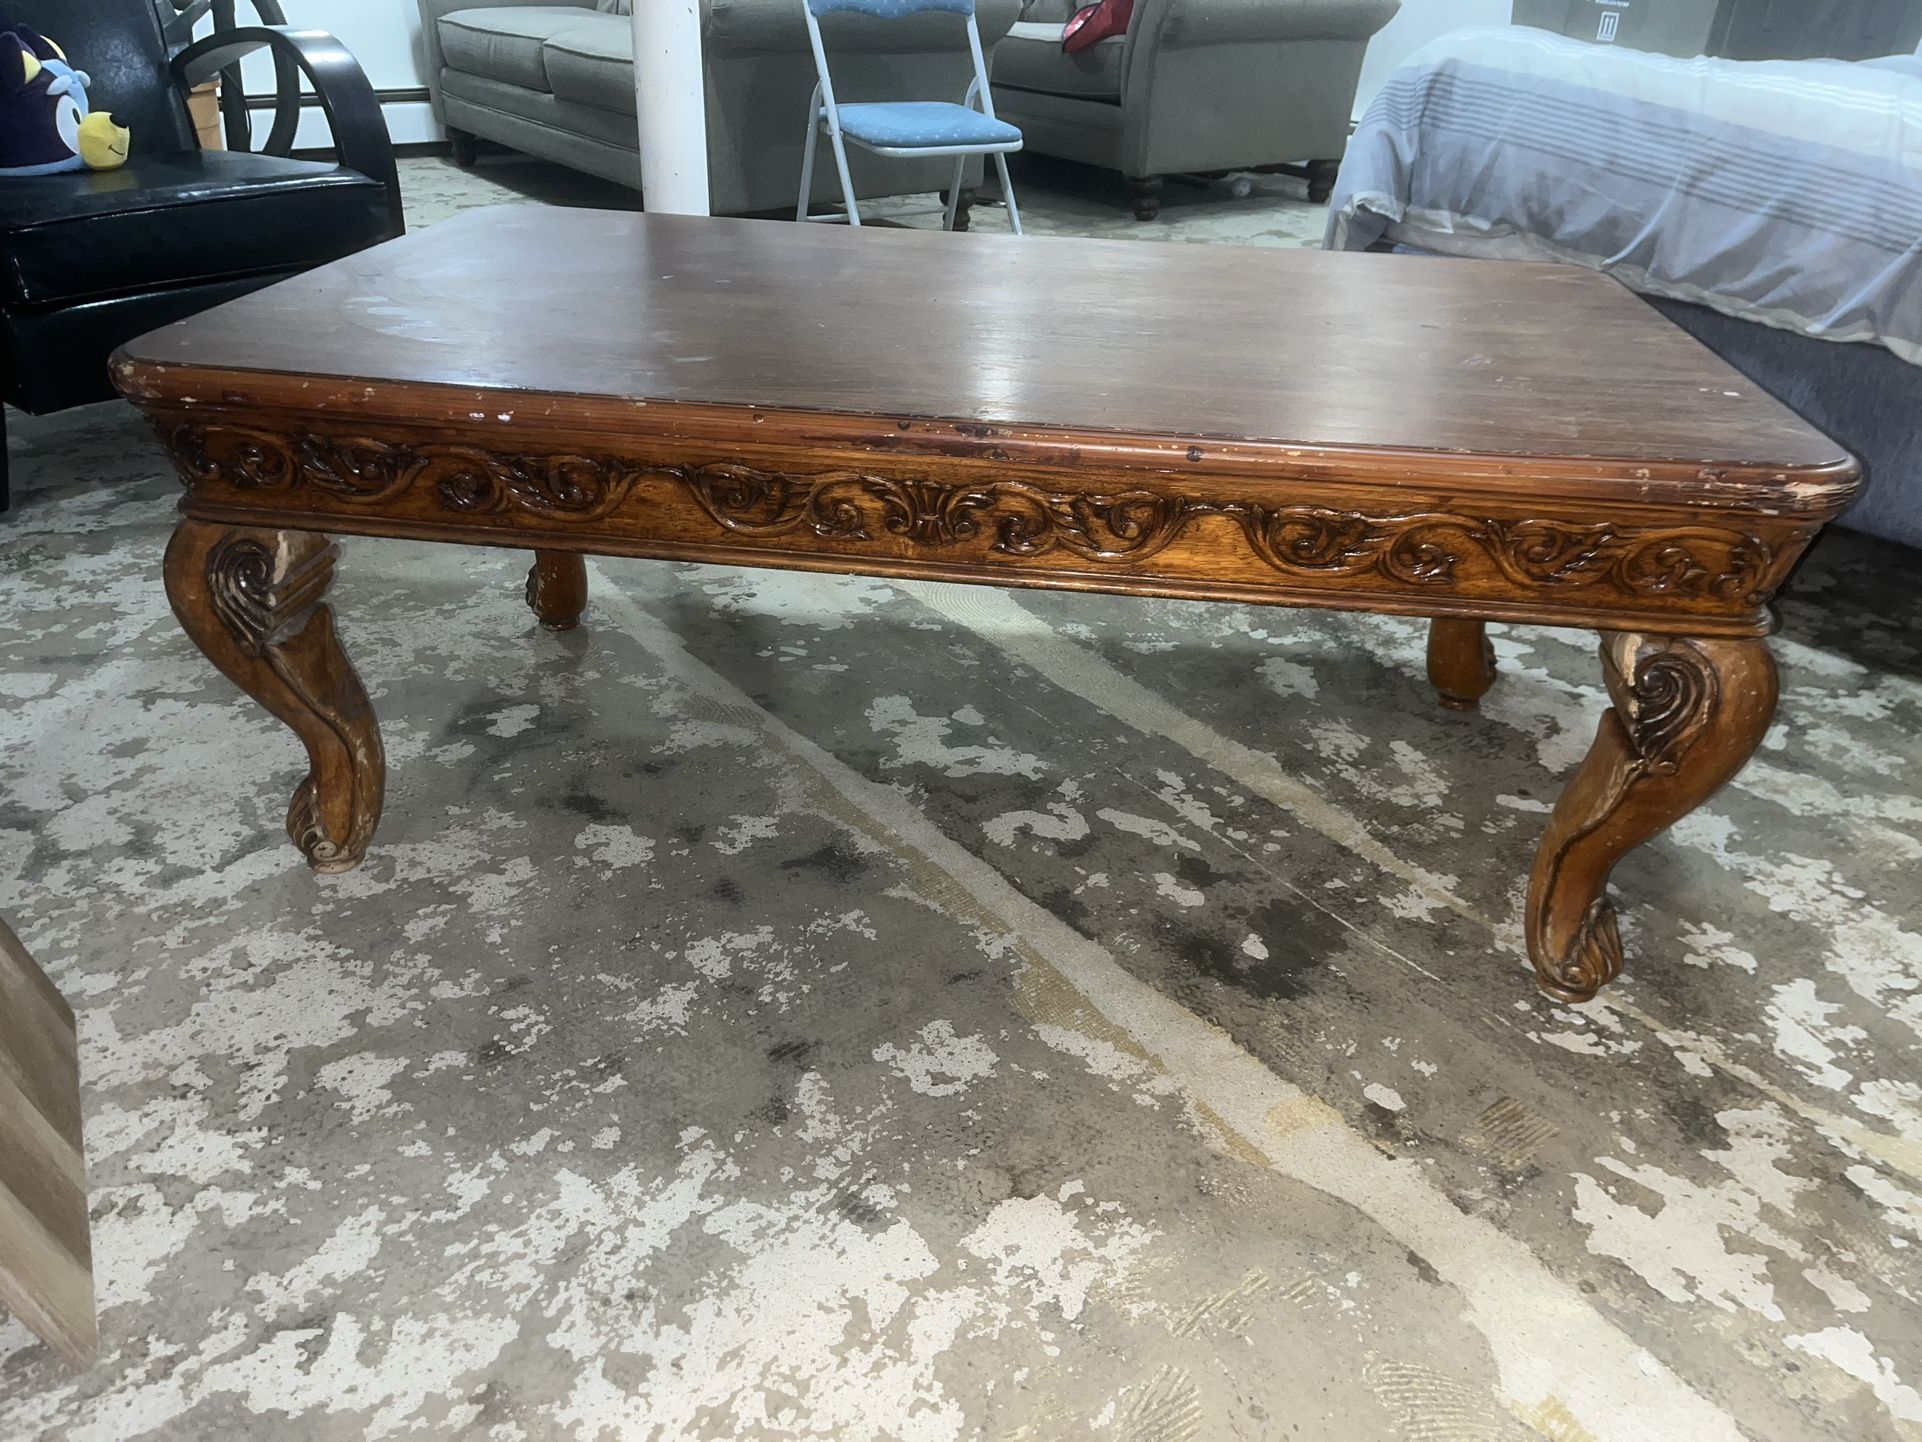 A Large Antique Carved Wooden Coffee Table Dying To Be Restored